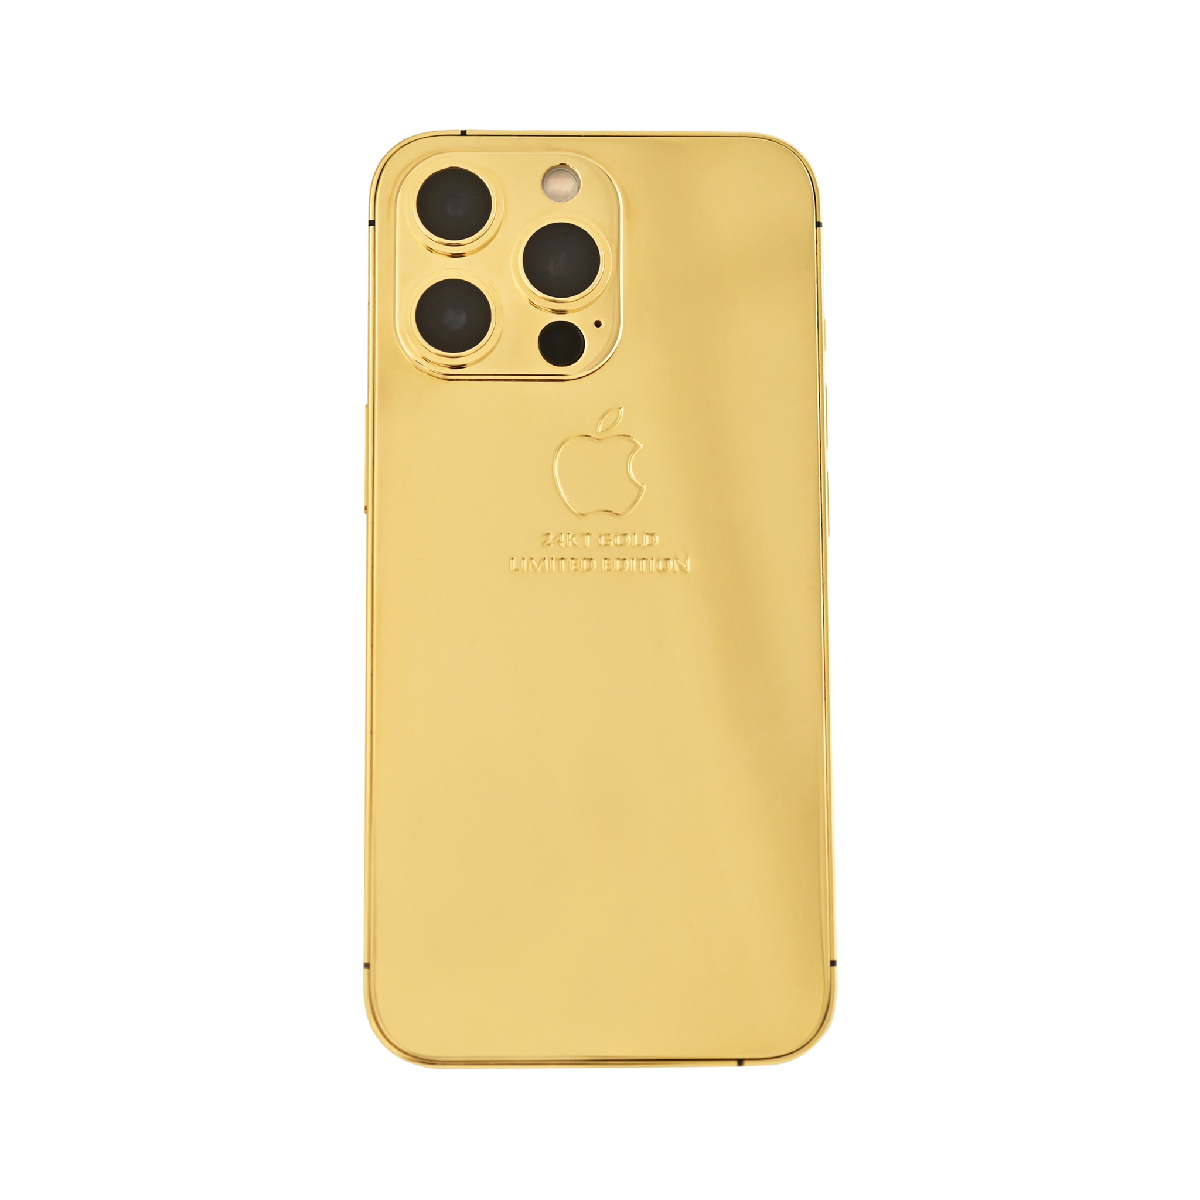 Caviar Luxury 24k Full Gold Customized iPhone 13 Pro Max 128 GB Limited Edition